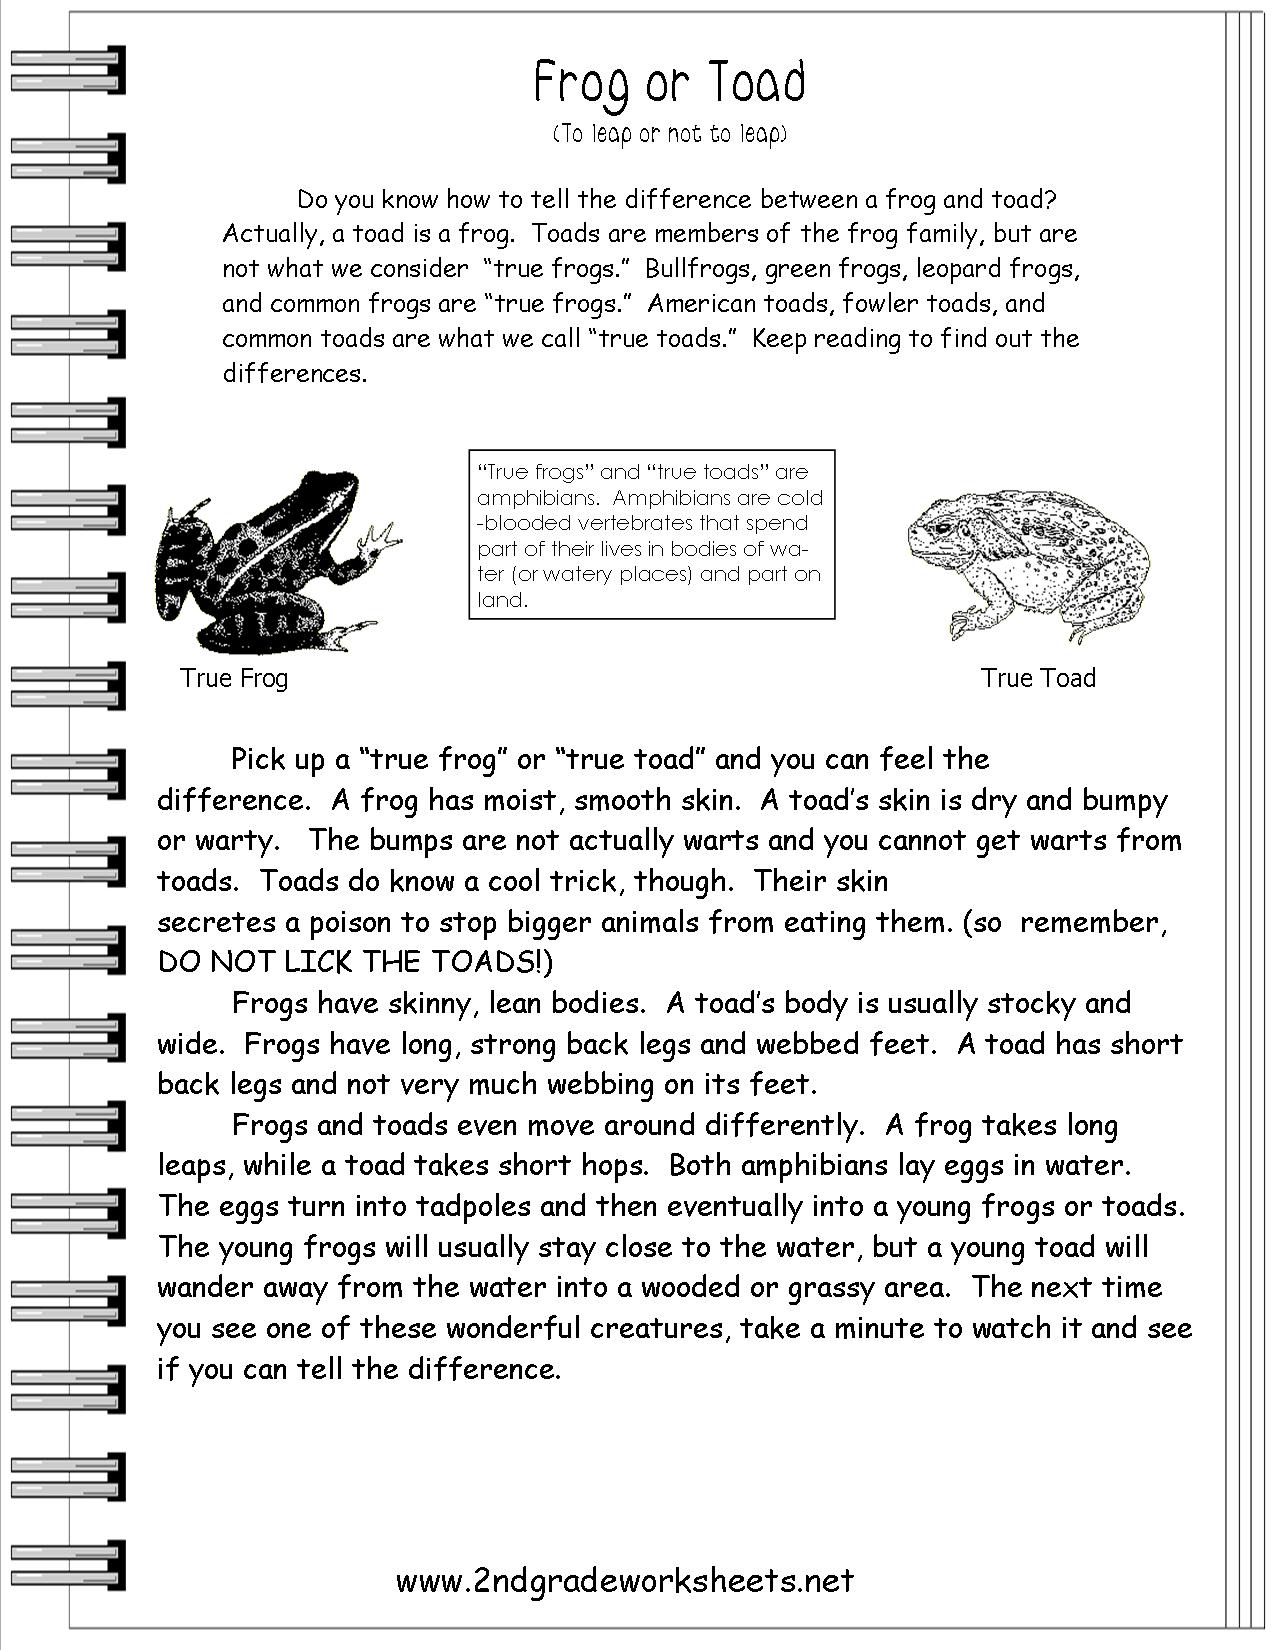 Reading Informational Text Worksheets 2nd Grade Image